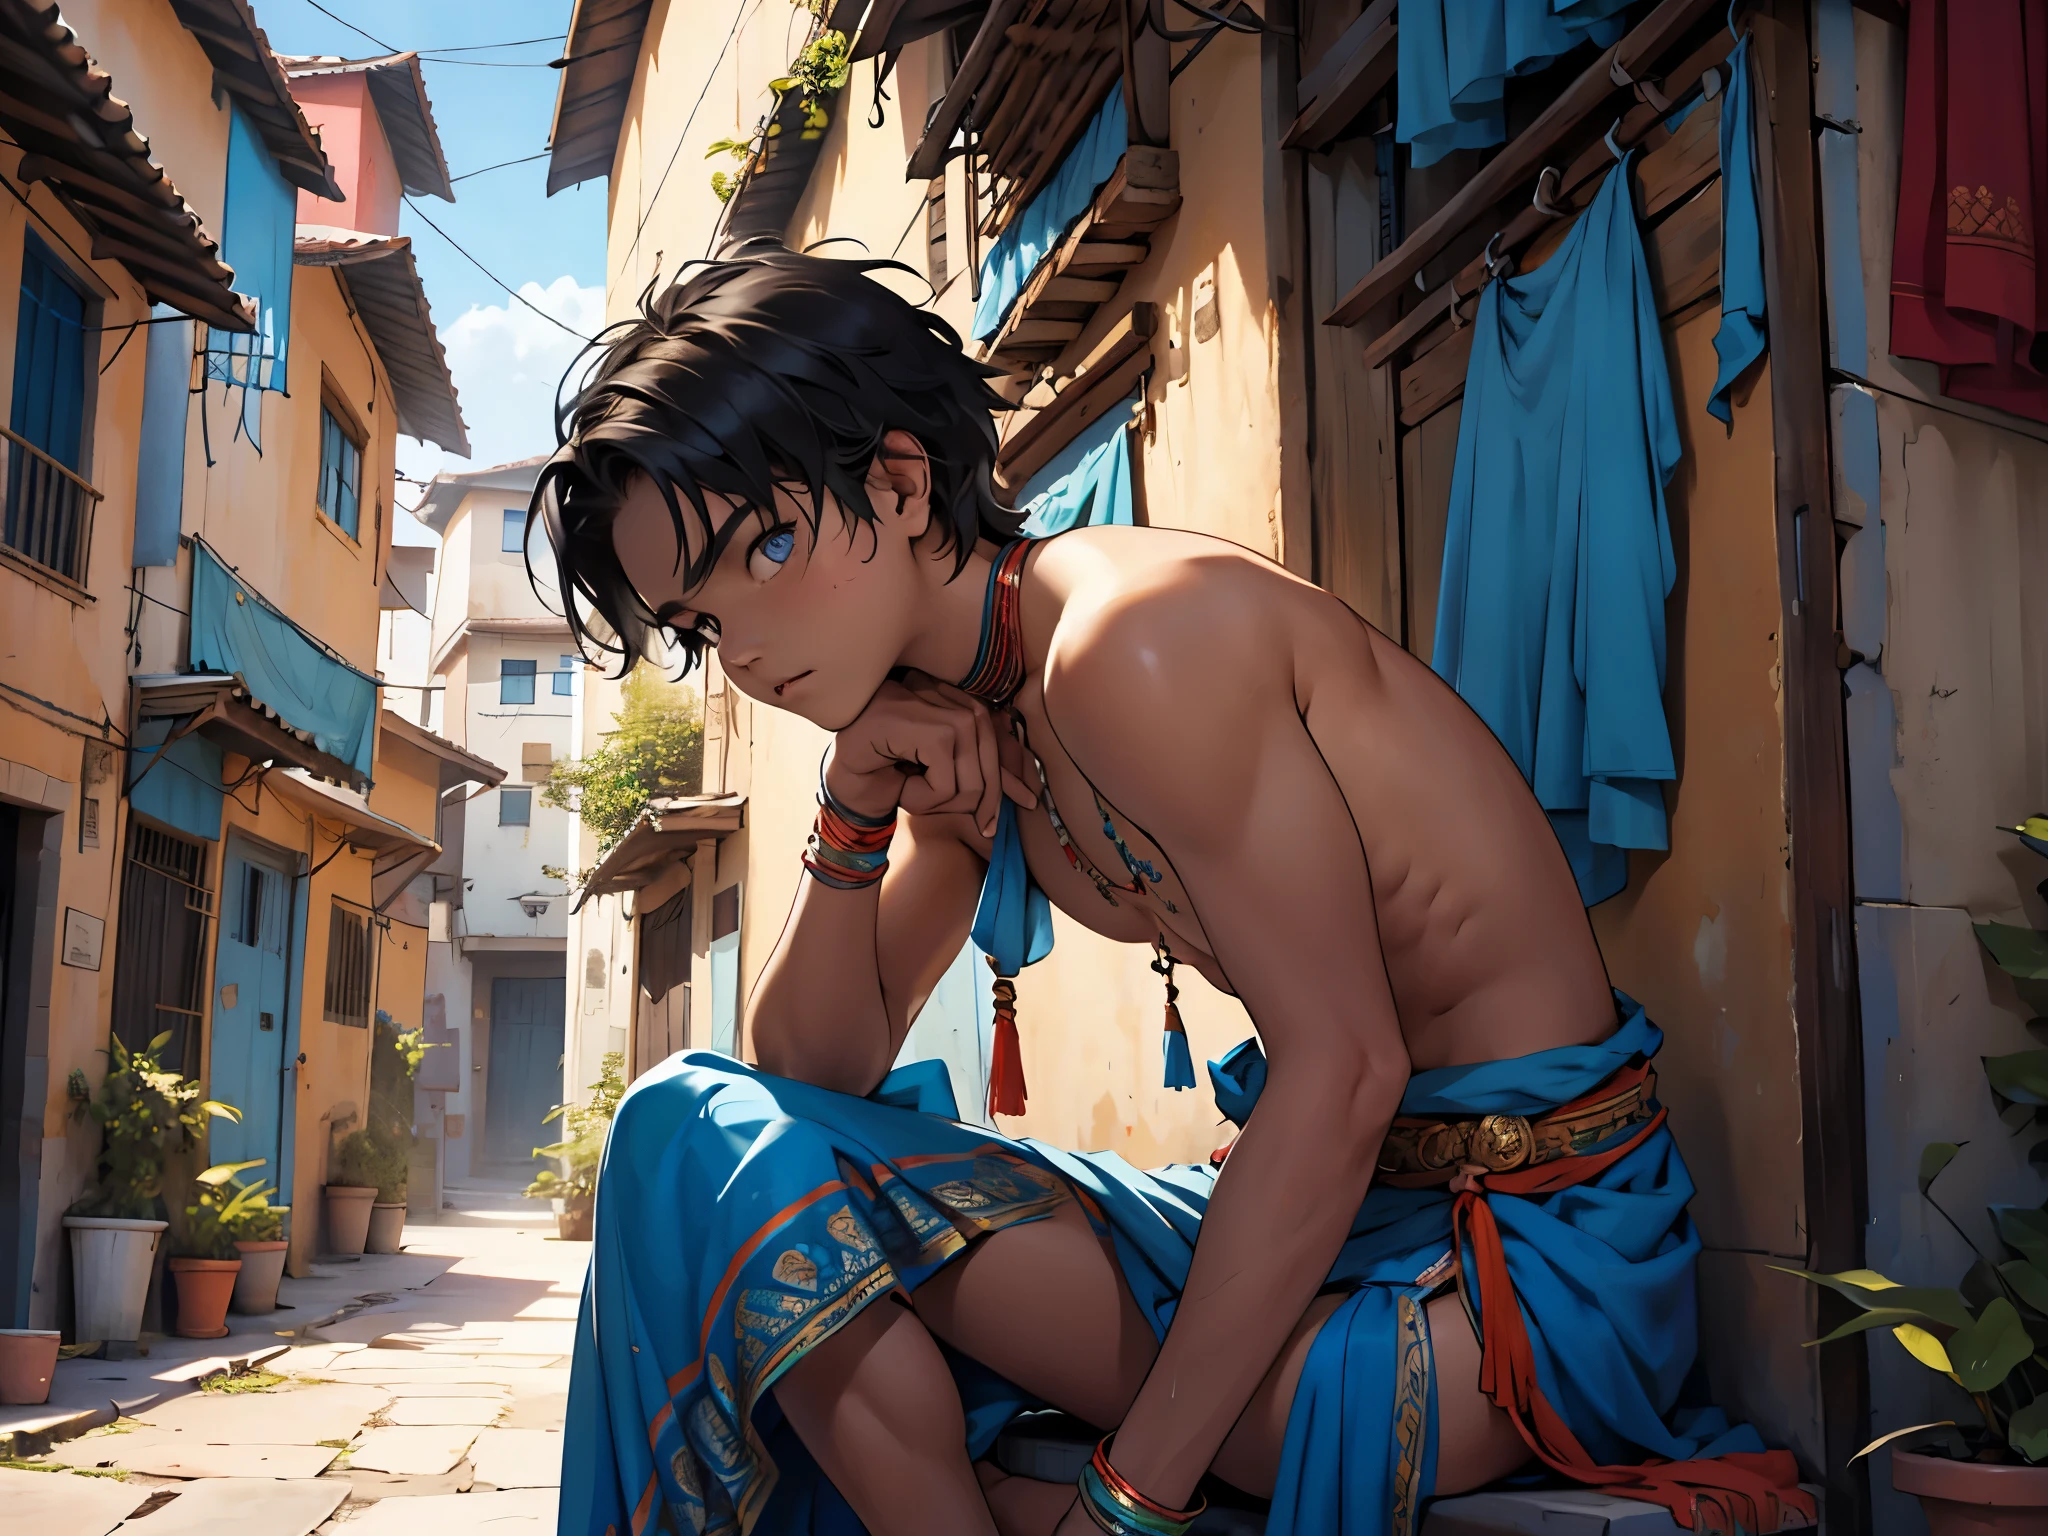 There is a 16 year old boy strangely dressed in Indian tribal clothes., His hair is blue, blue eyes, he is on top of a boarding school on the terrace looking at a city, he is bewildered, somewhat sad, seen from below. 